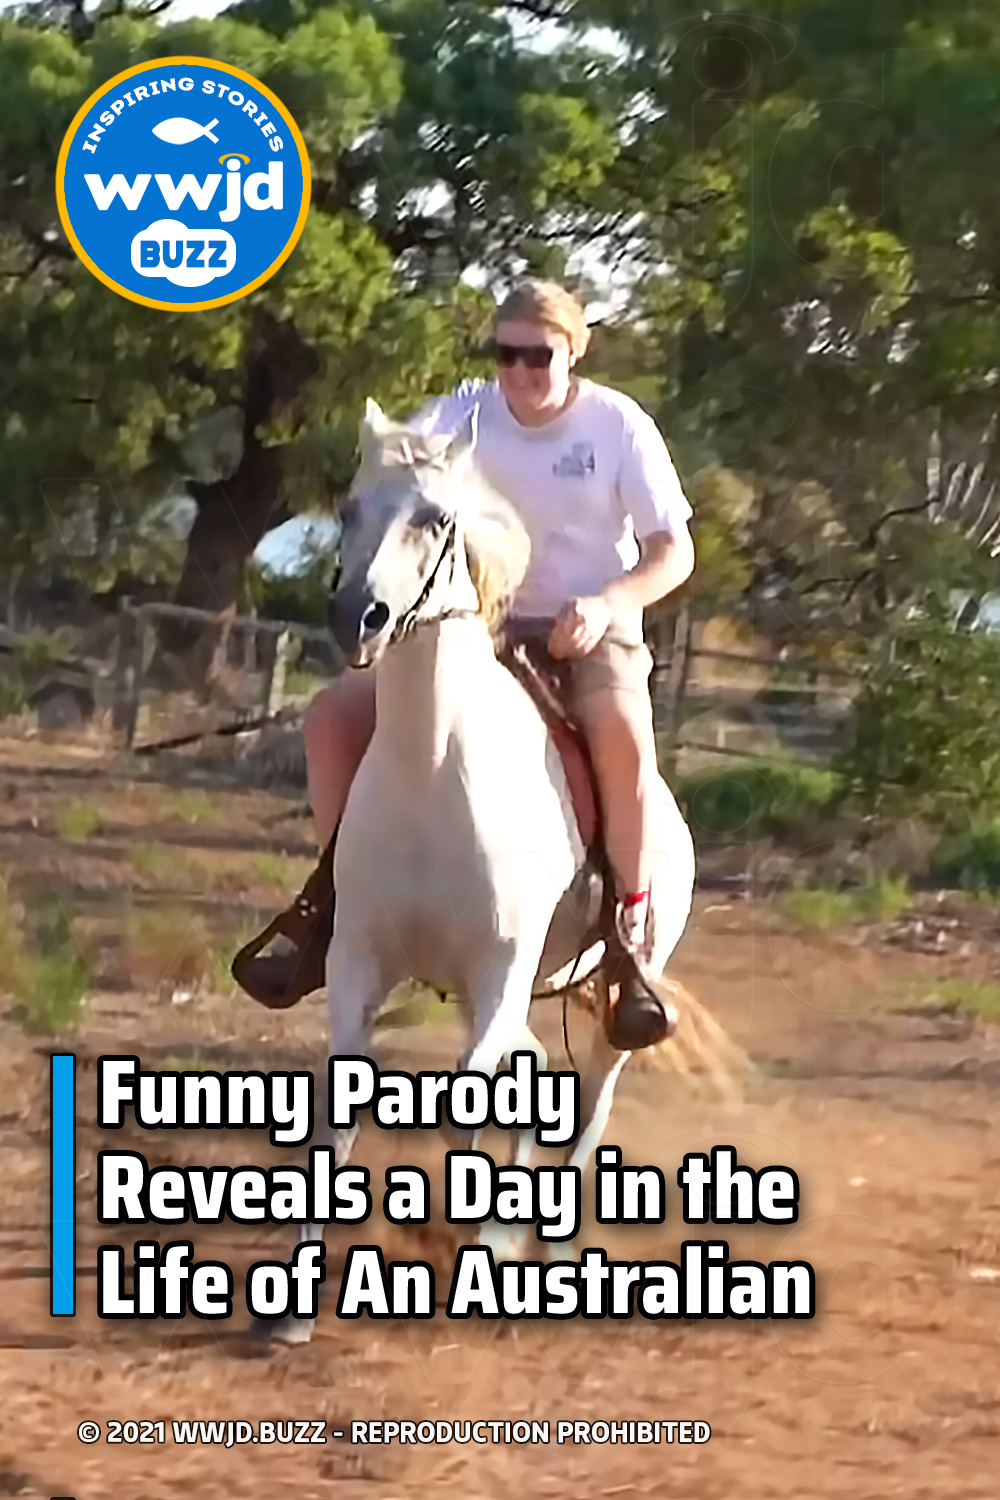 Funny Parody Reveals a Day in the Life of An Australian